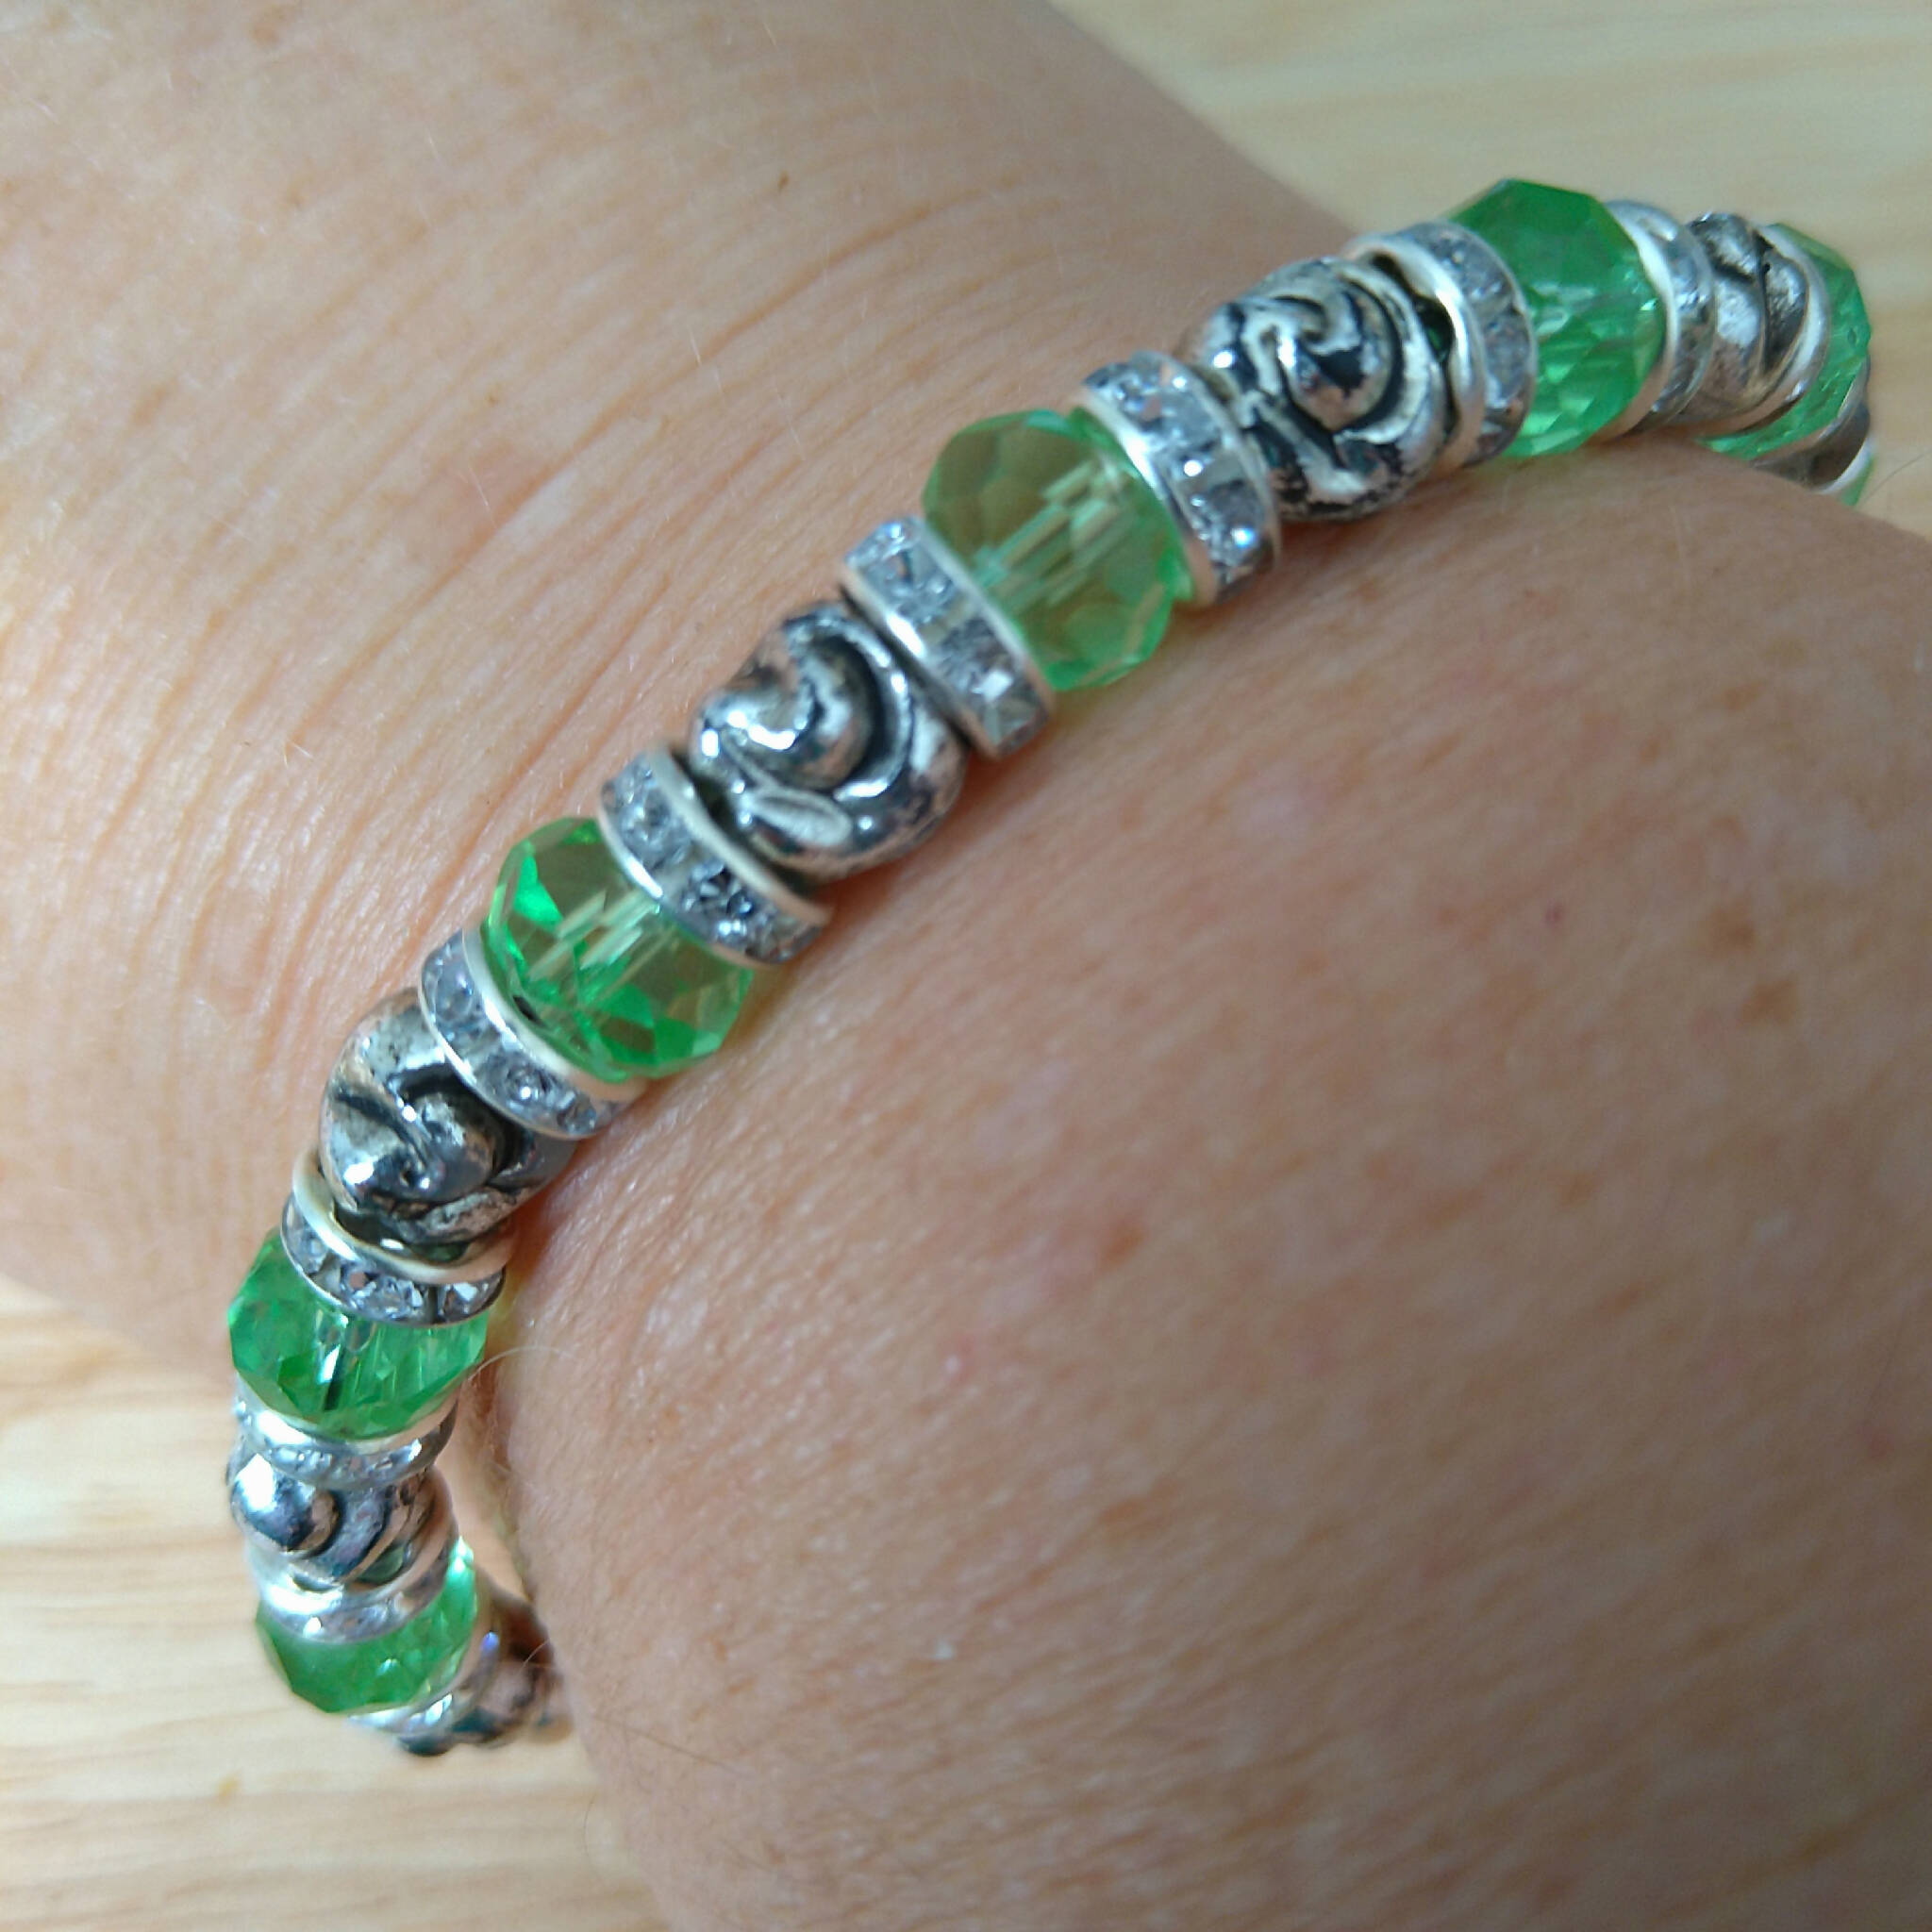 Handmade bracelet with recycled green & silver coloured beads & rhinestone rondelle spacers. On wrist. Upcycled.